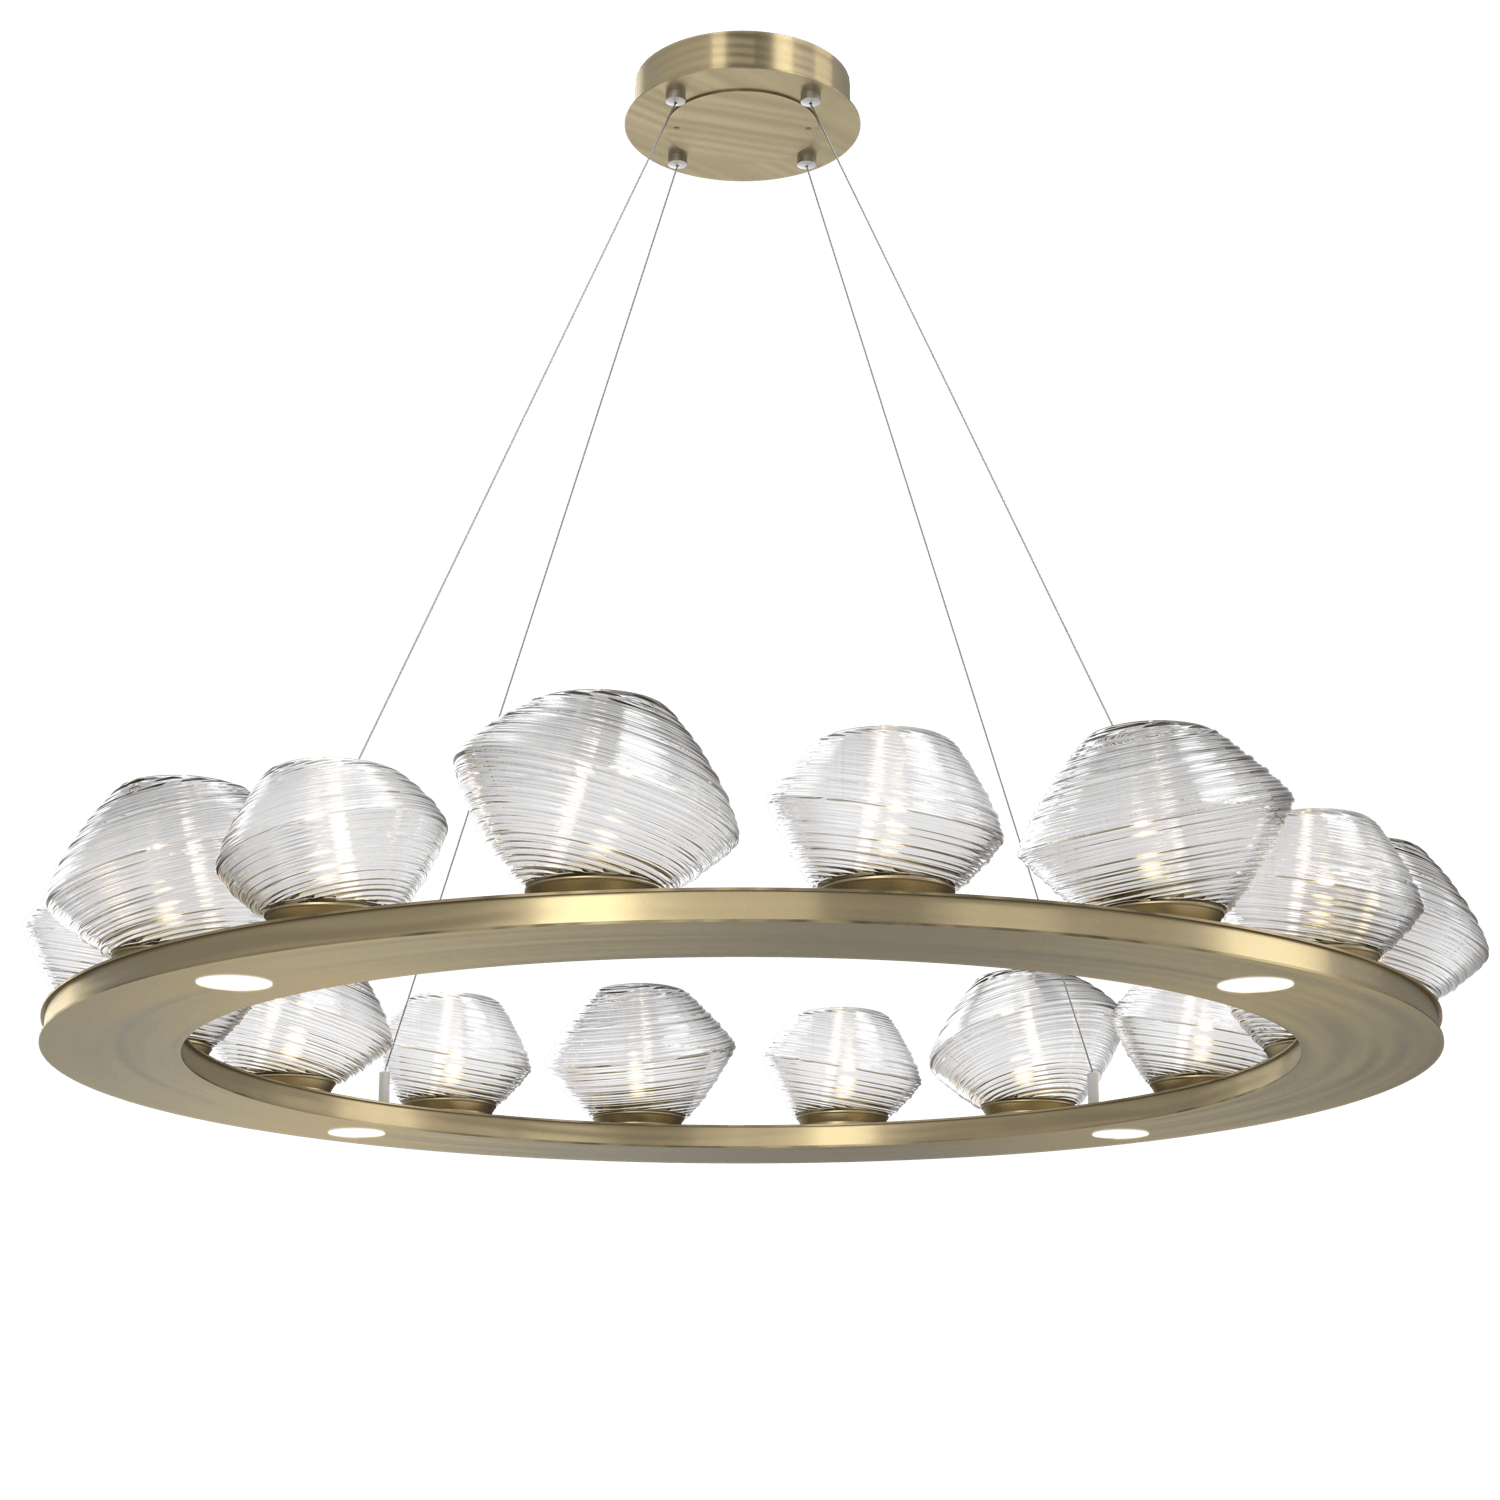 CHB0089-0D-HB-C-Hammerton-Studio-Mesa-48-inch-ring-chandelier-with-heritage-brass-finish-and-clear-blown-glass-shades-and-LED-lamping